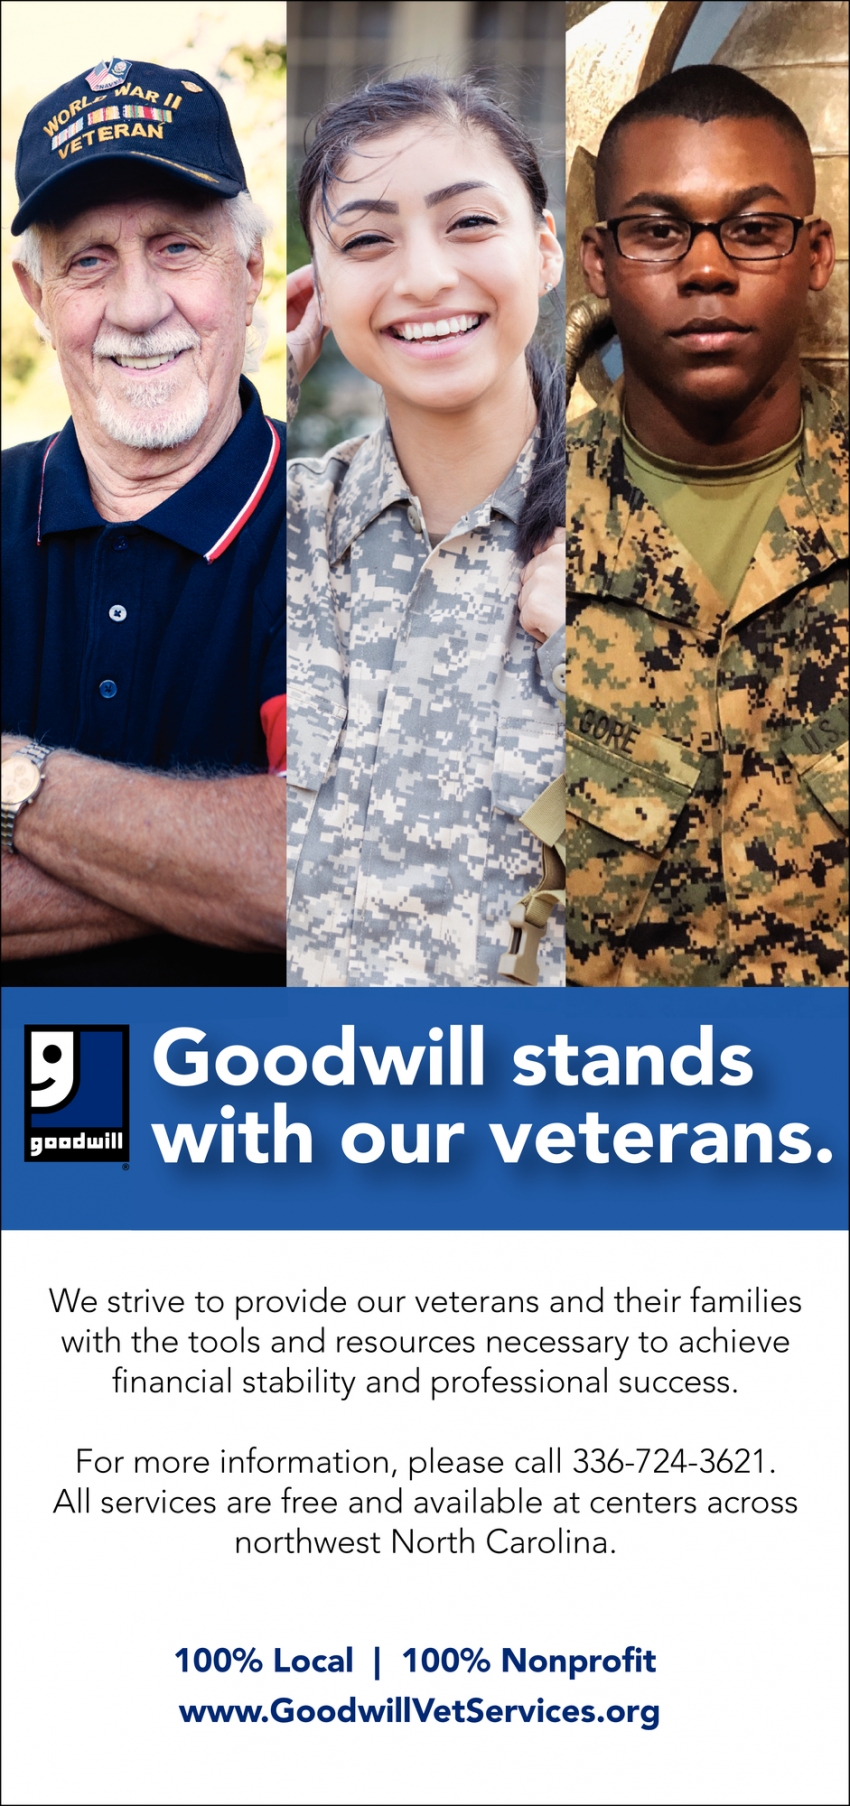 Goodwill Stands With Our Veterans